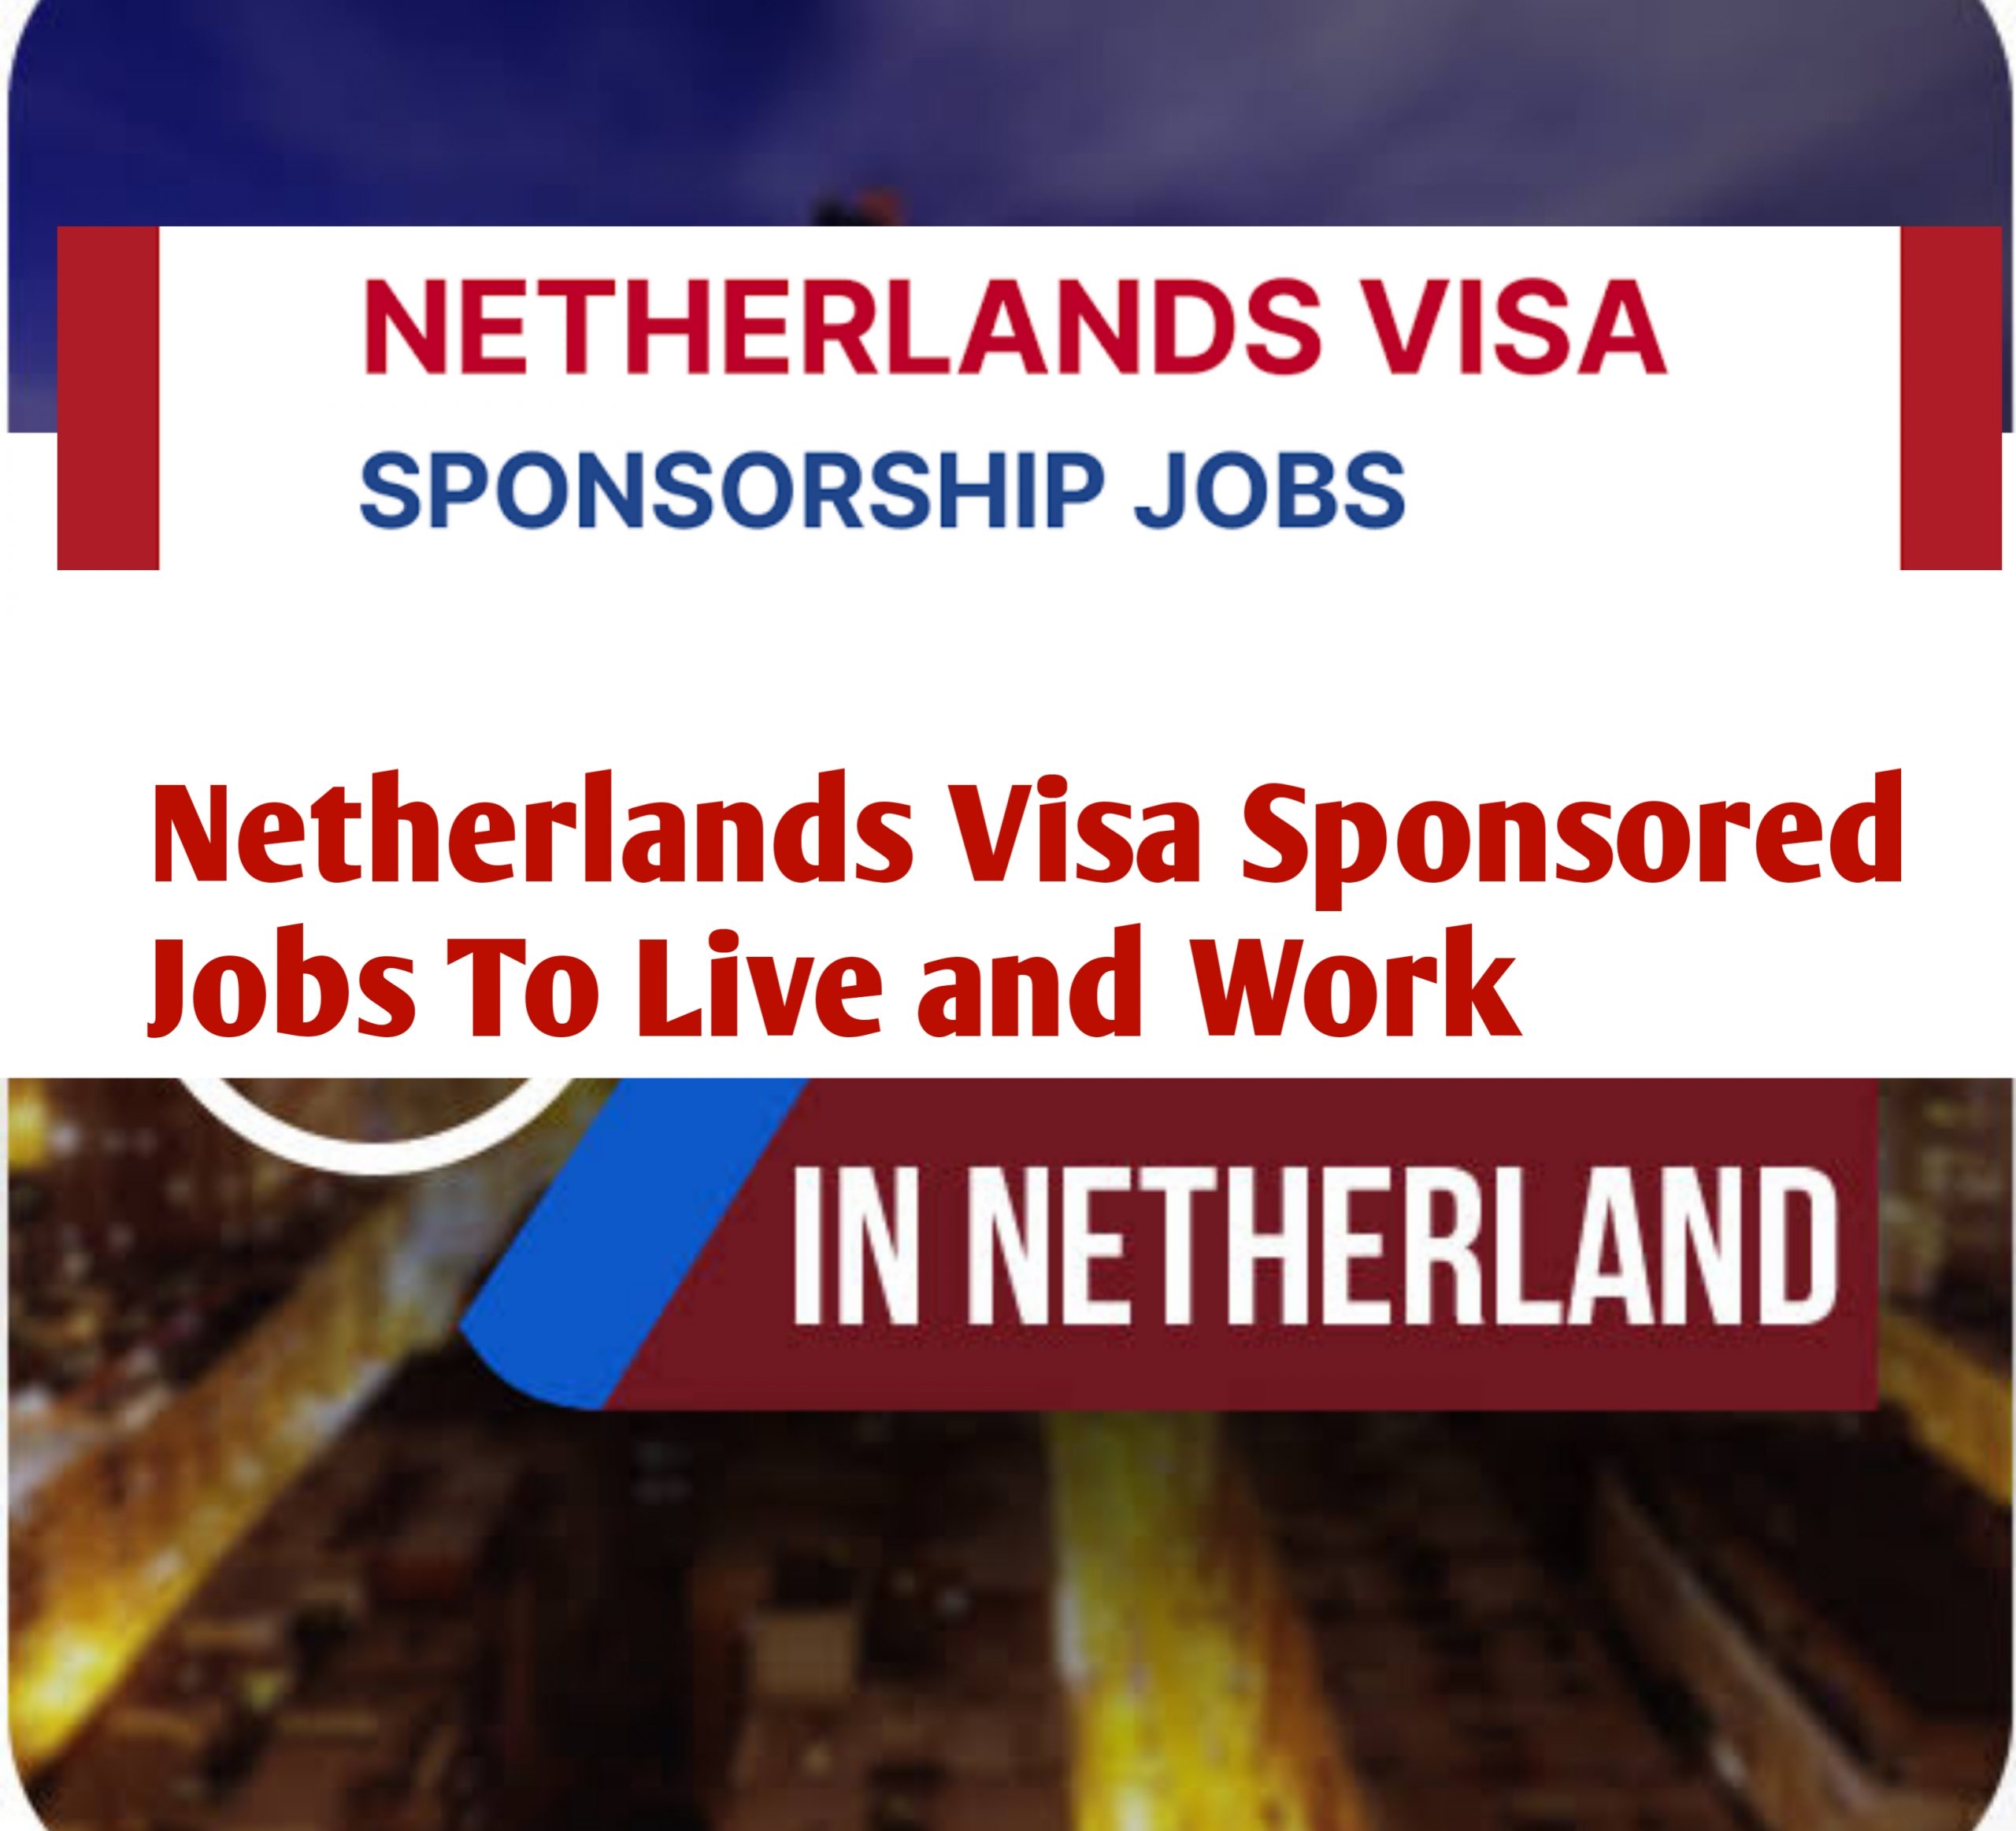 20221023 183929 scaled - Netherlands Visa Sponsored Jobs To Live and Work in Netherlands, How To Apply